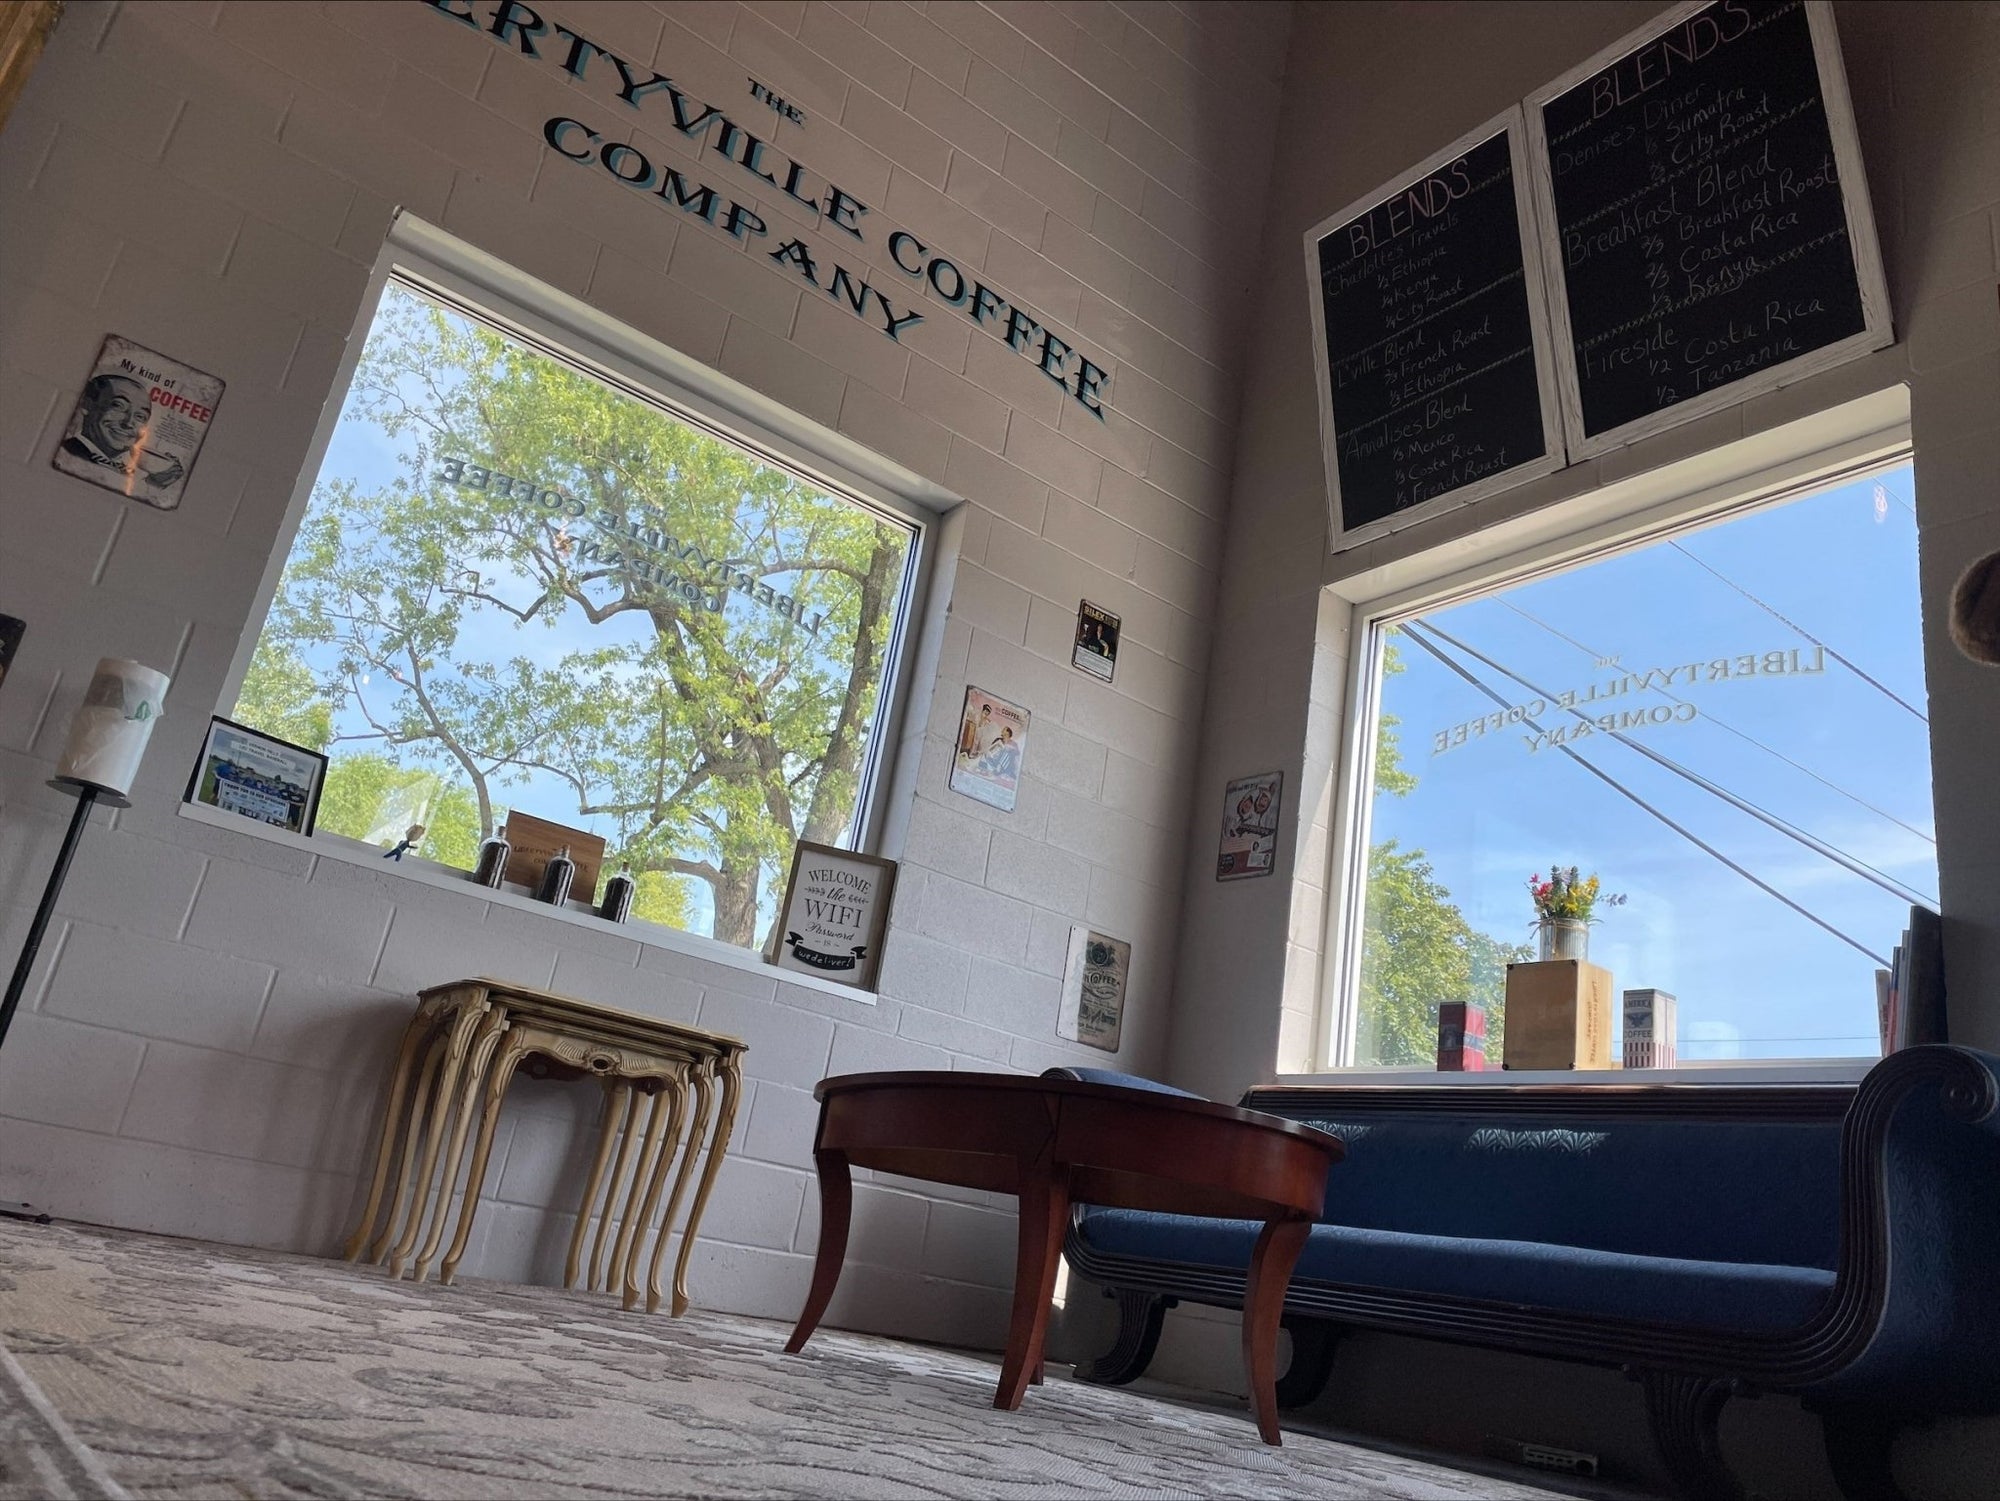 A Coffee Opportunity! - The Libertyville Coffee Co.